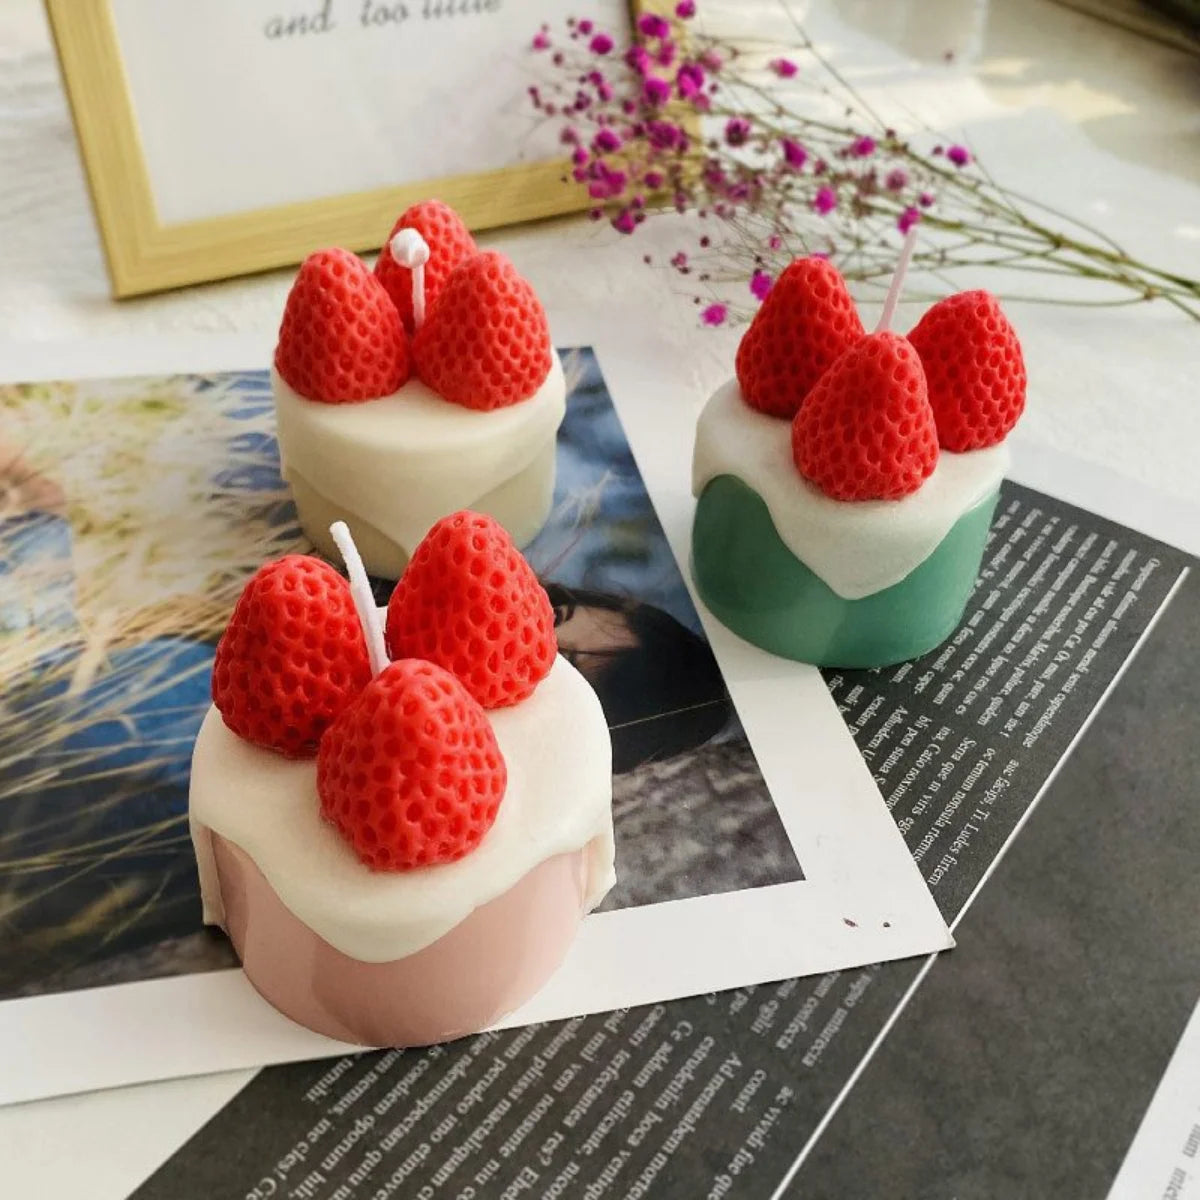 Strawberry Silicone Mould Fondant Cake Chocolate Jelly Candle Soap Making Mold